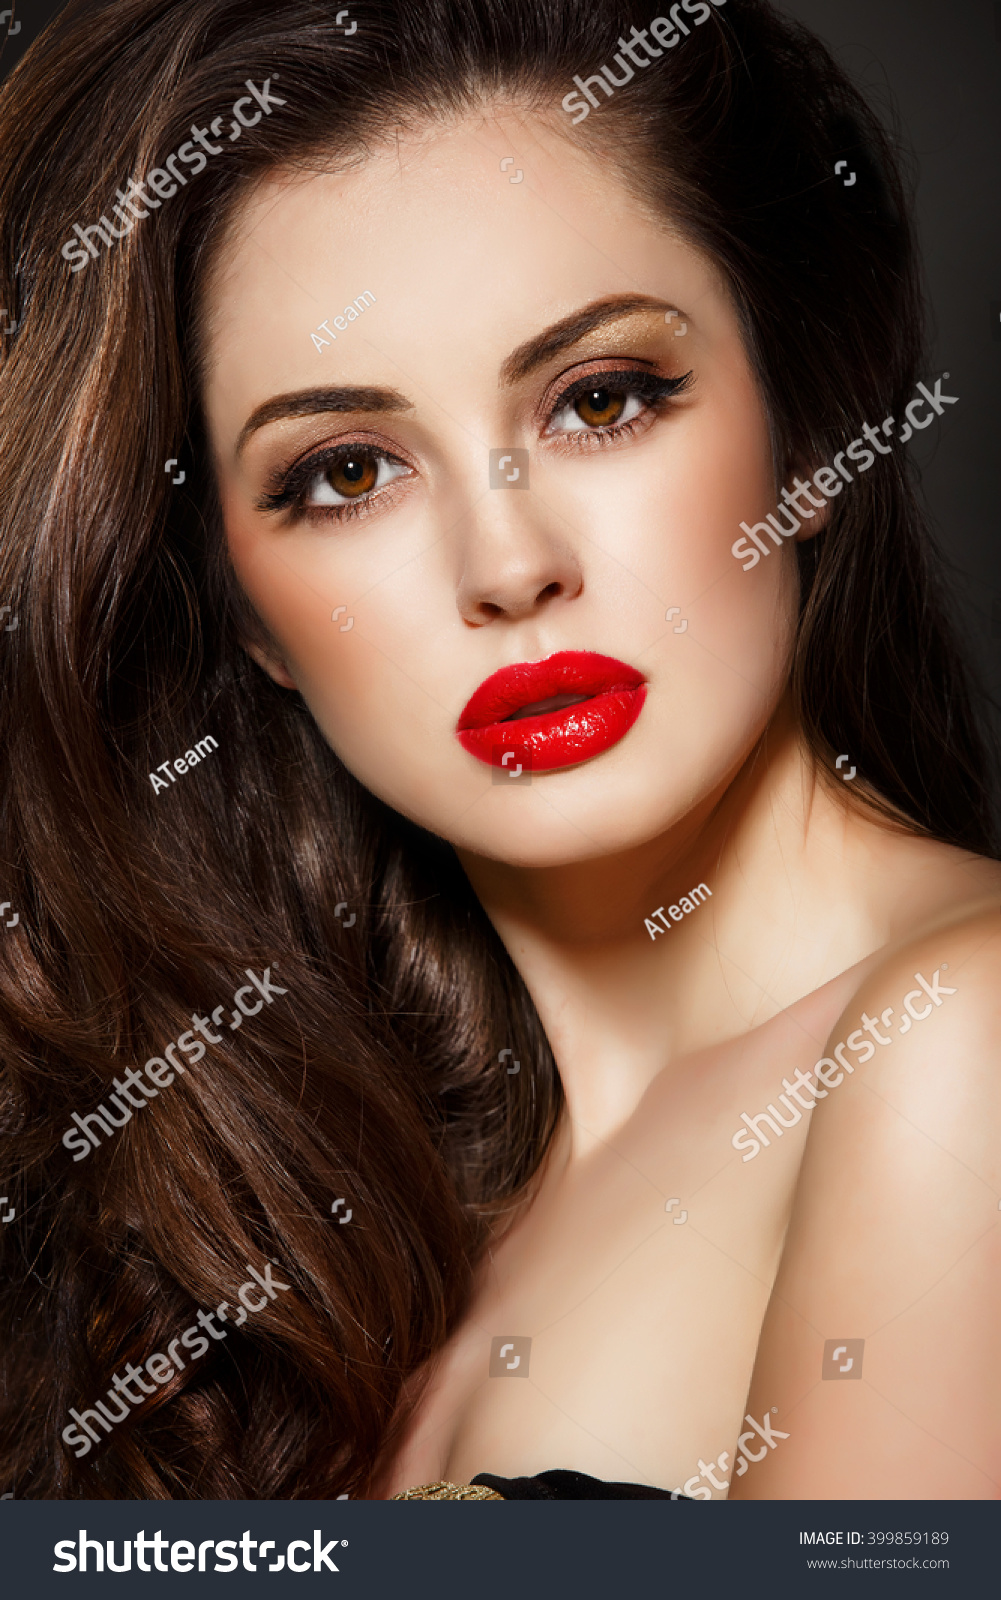 Red Lips Beauty Makeup Woman With Brunette Hair Beautiful Girl Portrait Sexy Fashion Female 156520 Hot Sex Picture